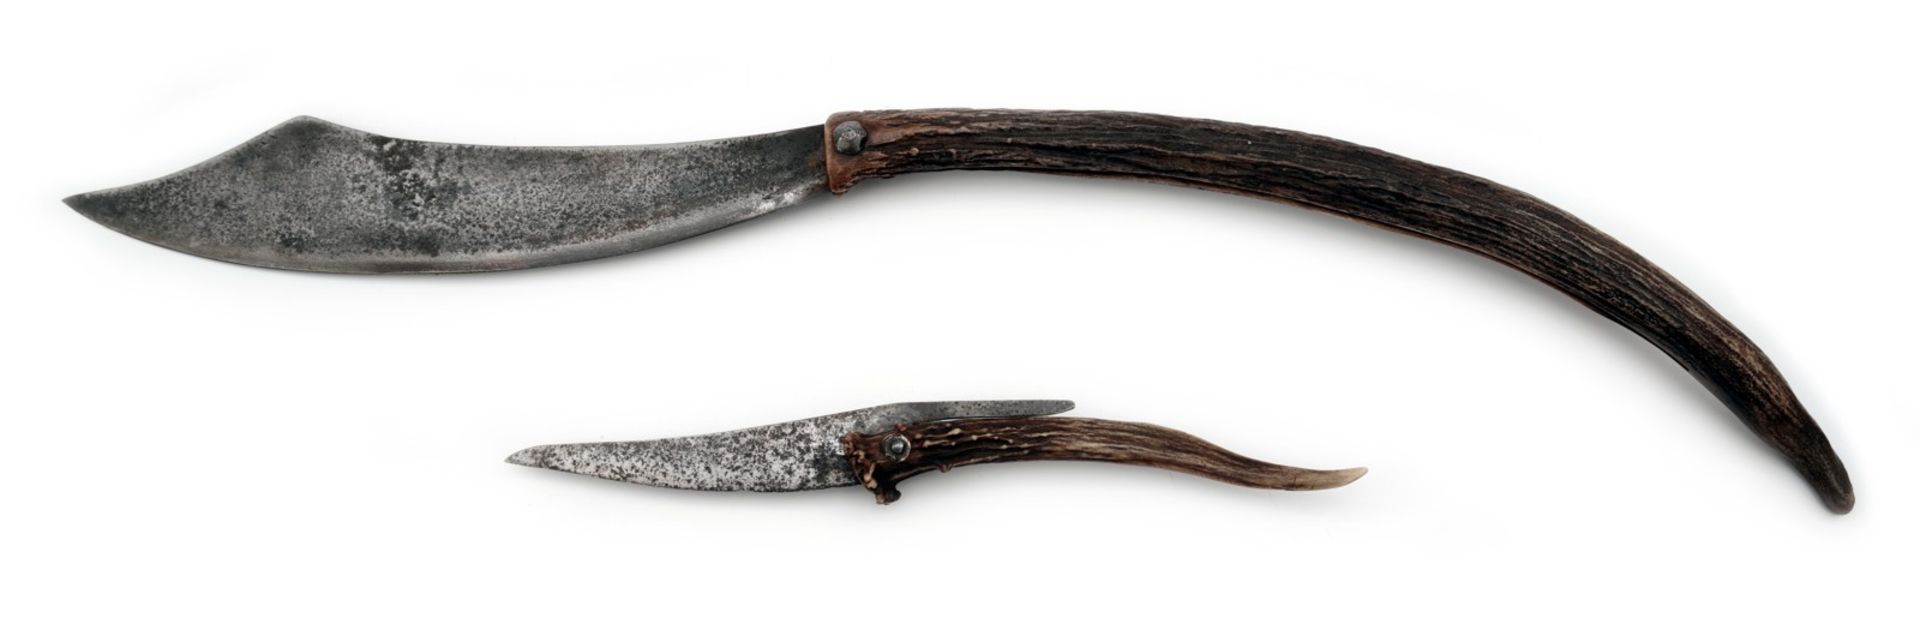 Two Folding Knives - Image 2 of 2